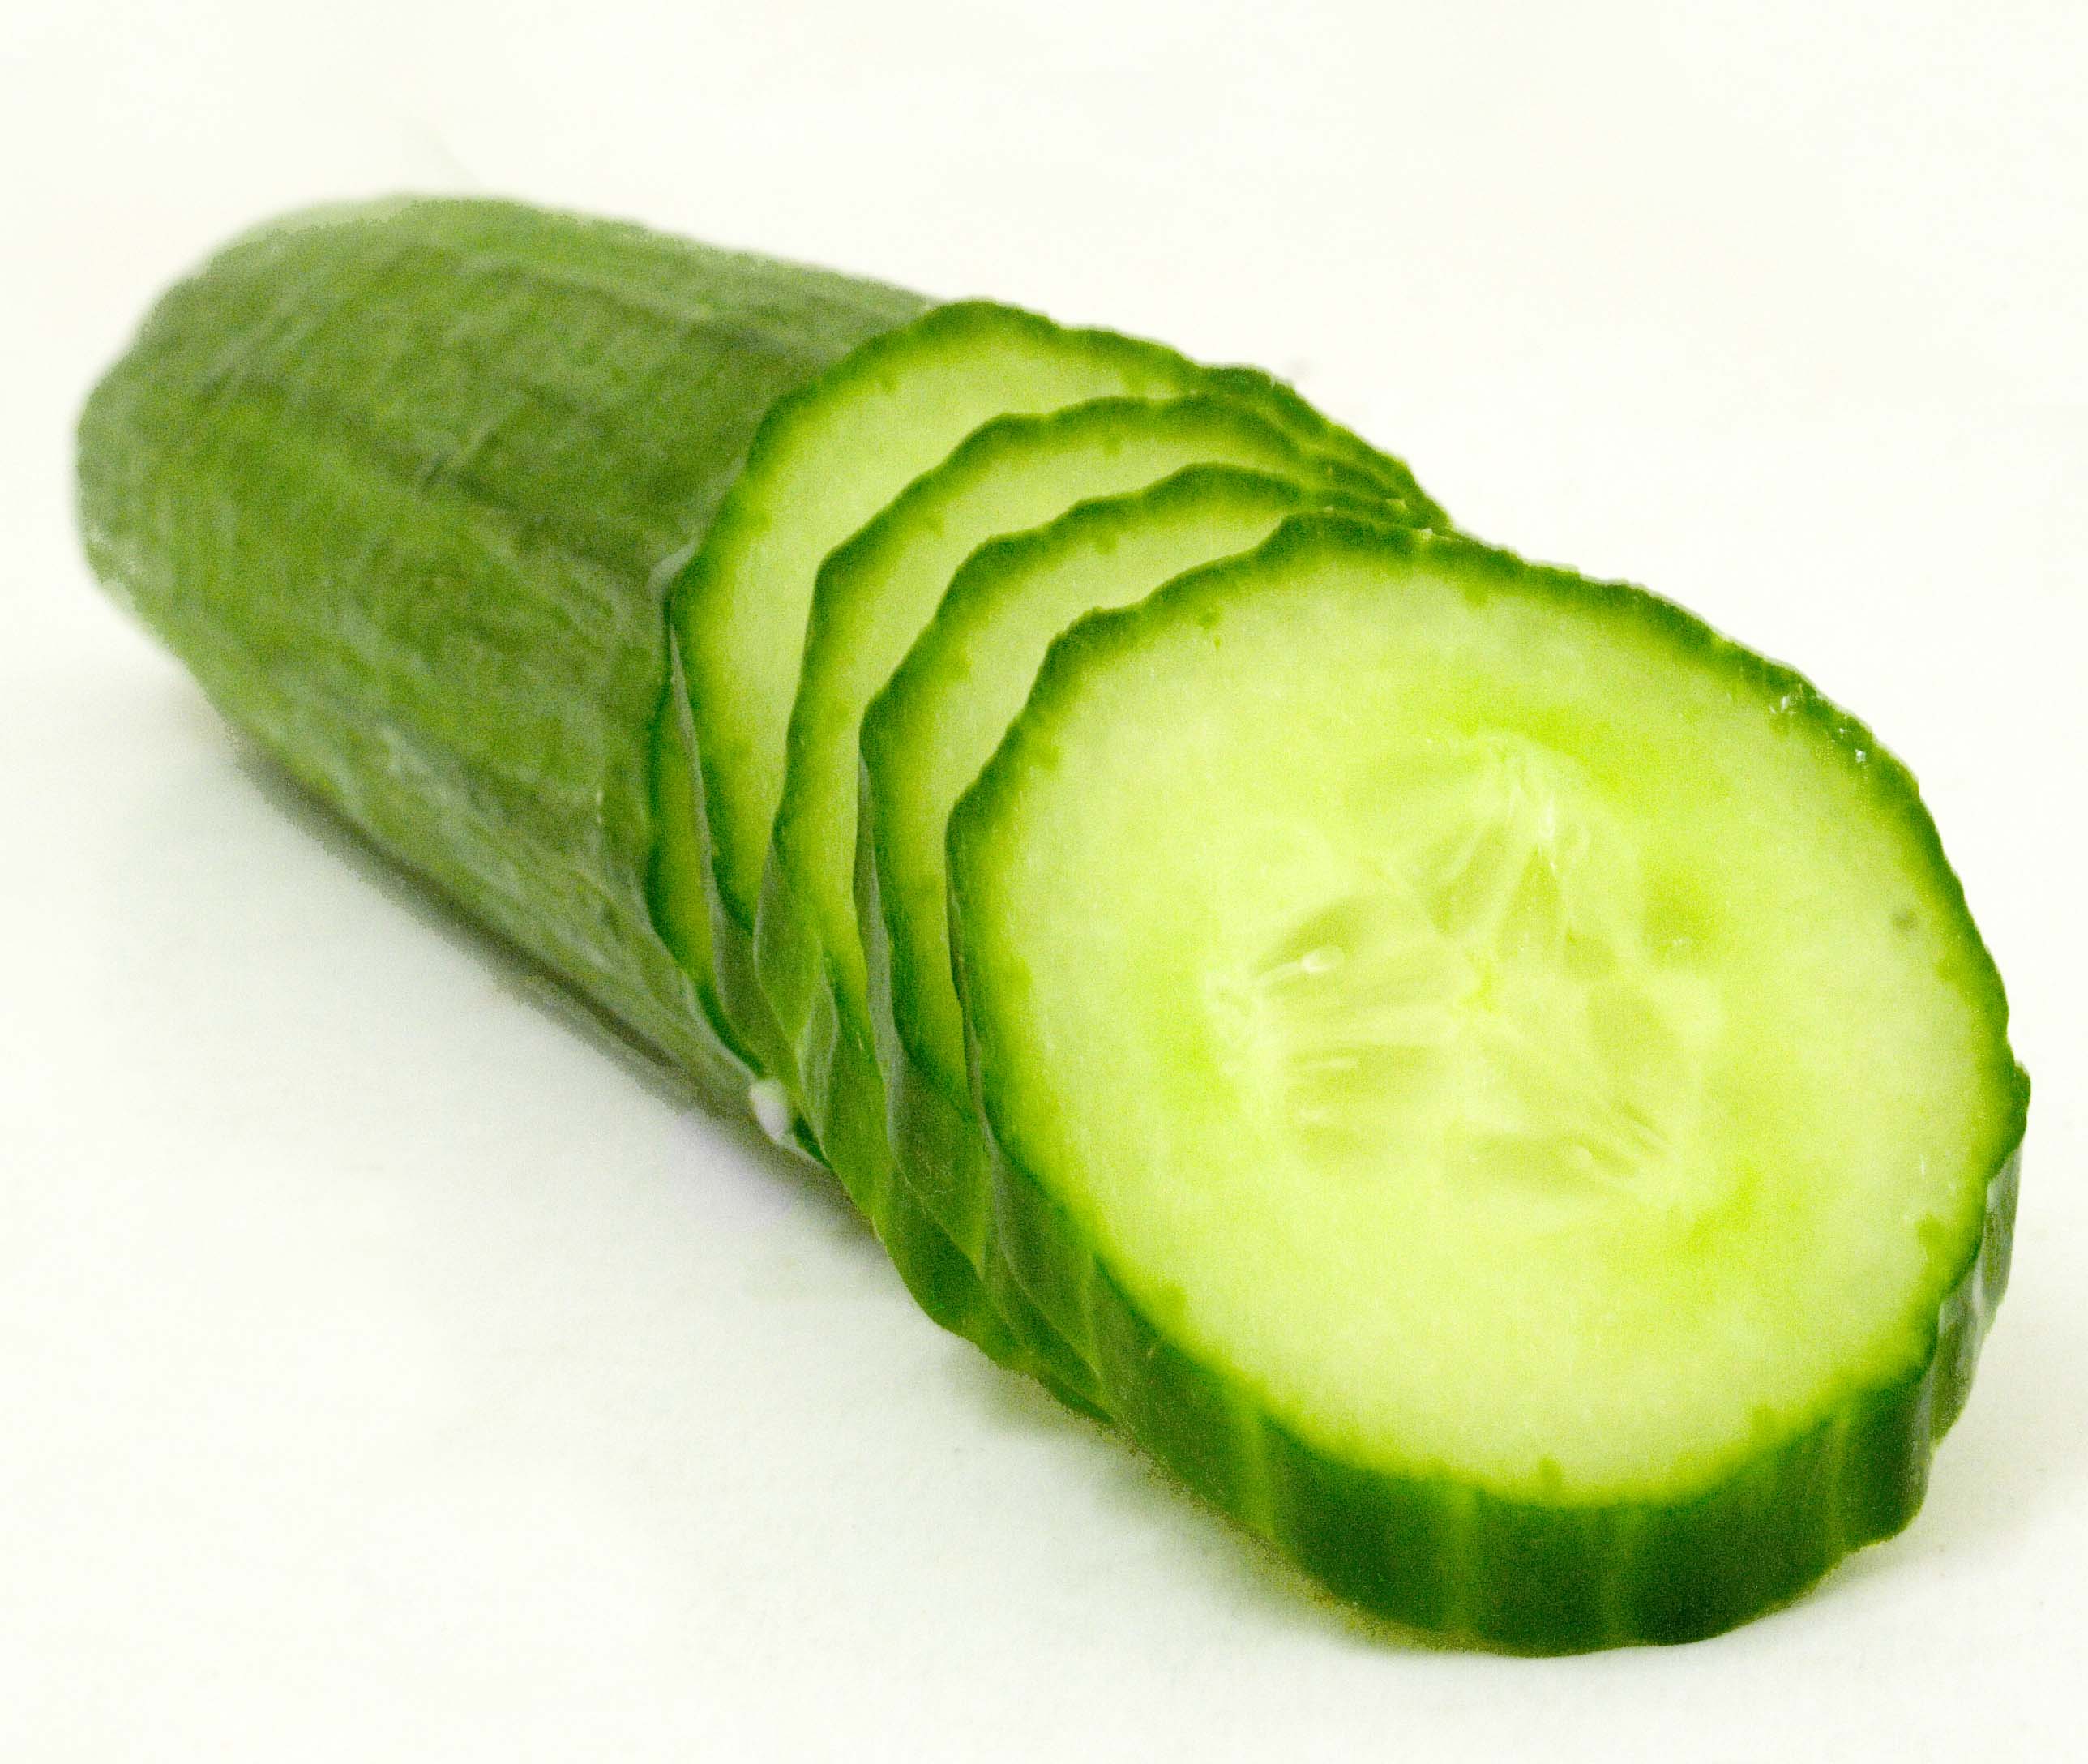 an Engles cucumber cut into slices